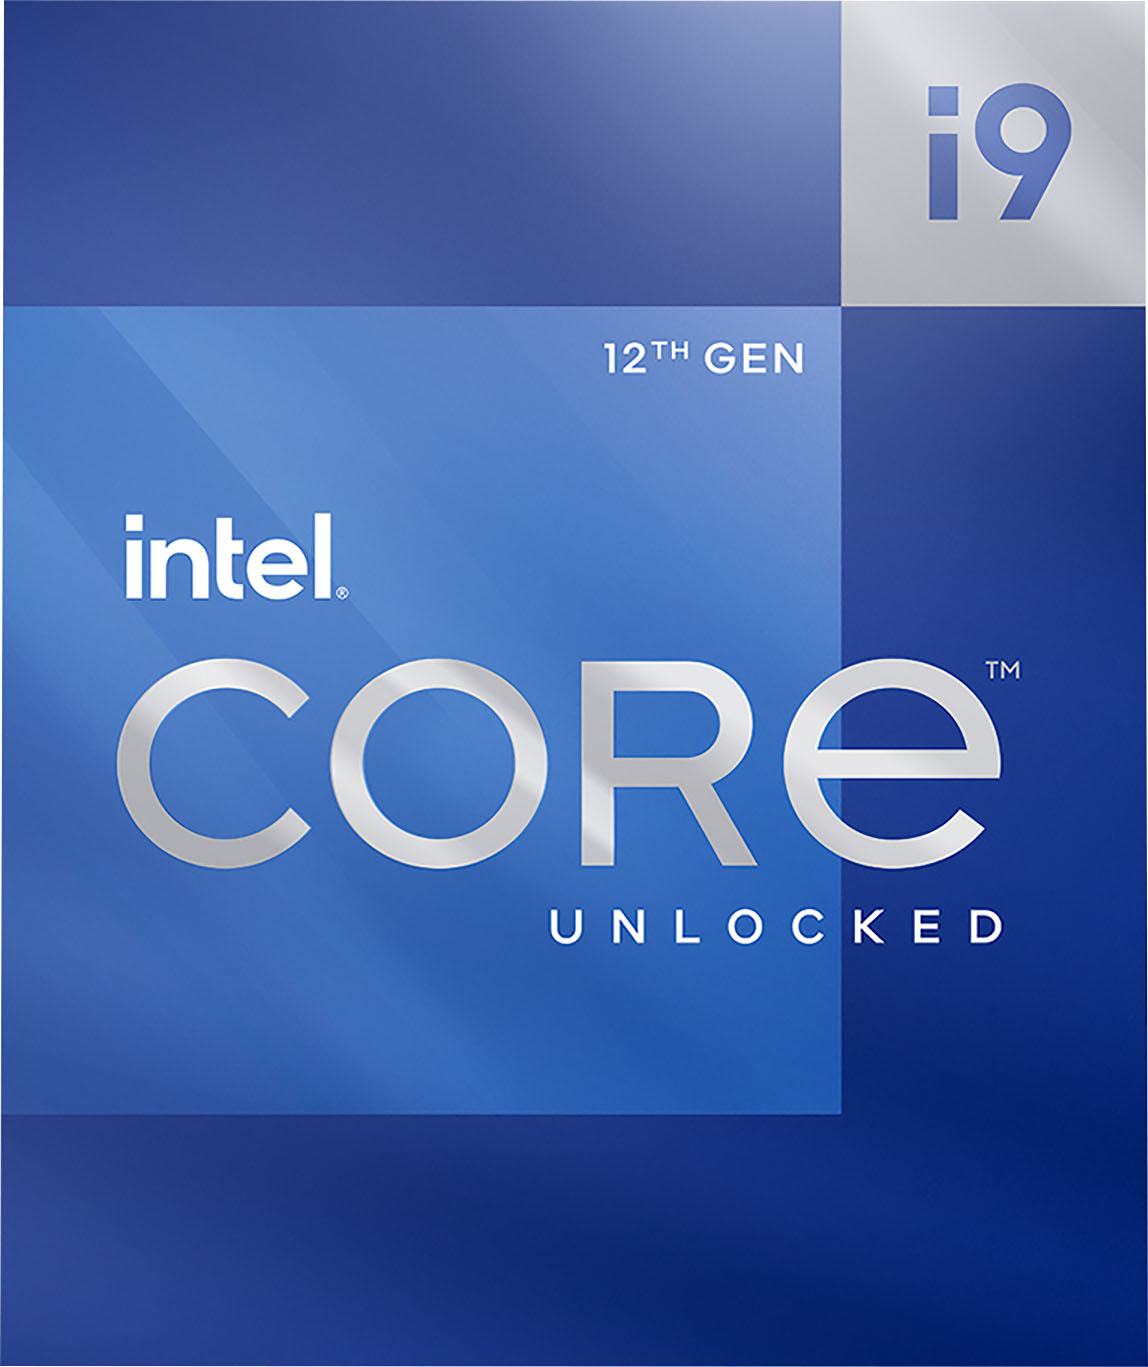 Intel – Core i9-12900K Desktop Processor 16 (8P+8E) Cores up to 5.2 GHz – Just $509.99 at Best Buy